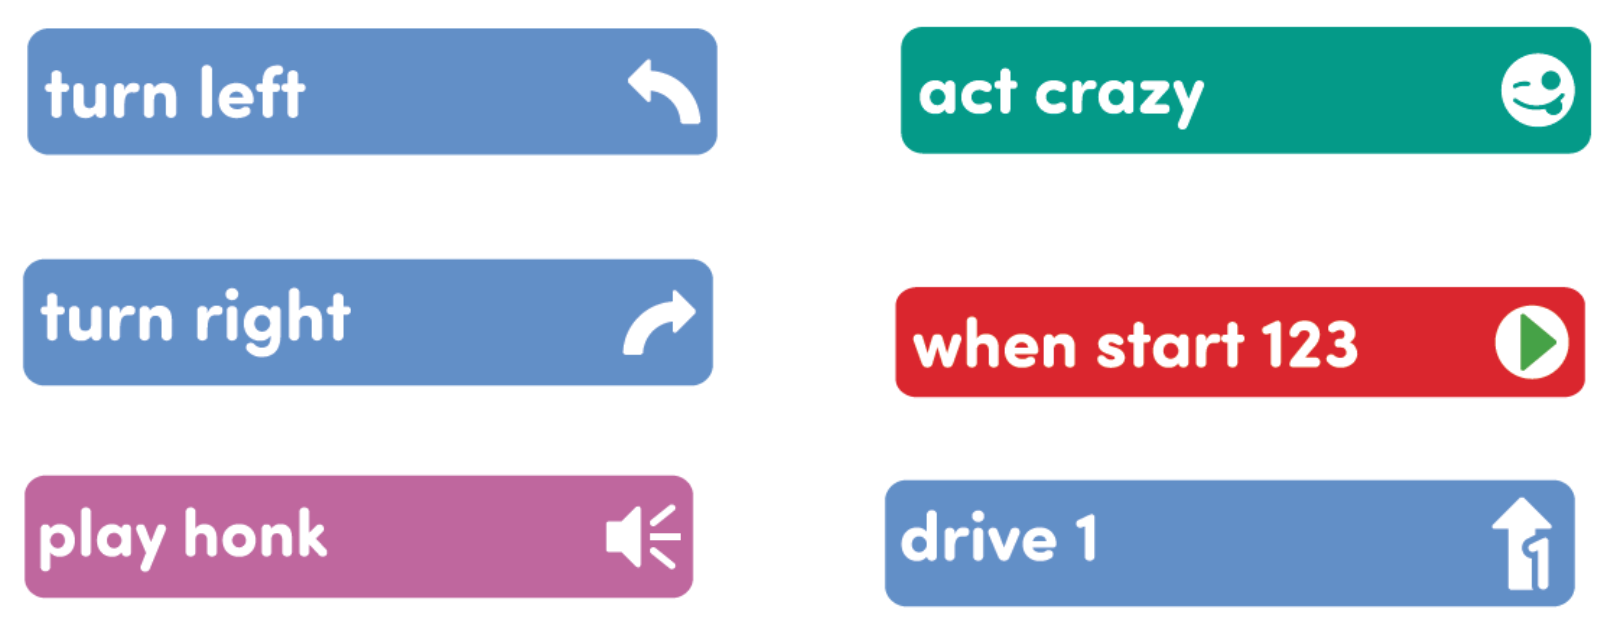 Image of Coder cards needed for this Lab: When start, Drive 1, Turn Left, Turn right, Play honk, Act crazy